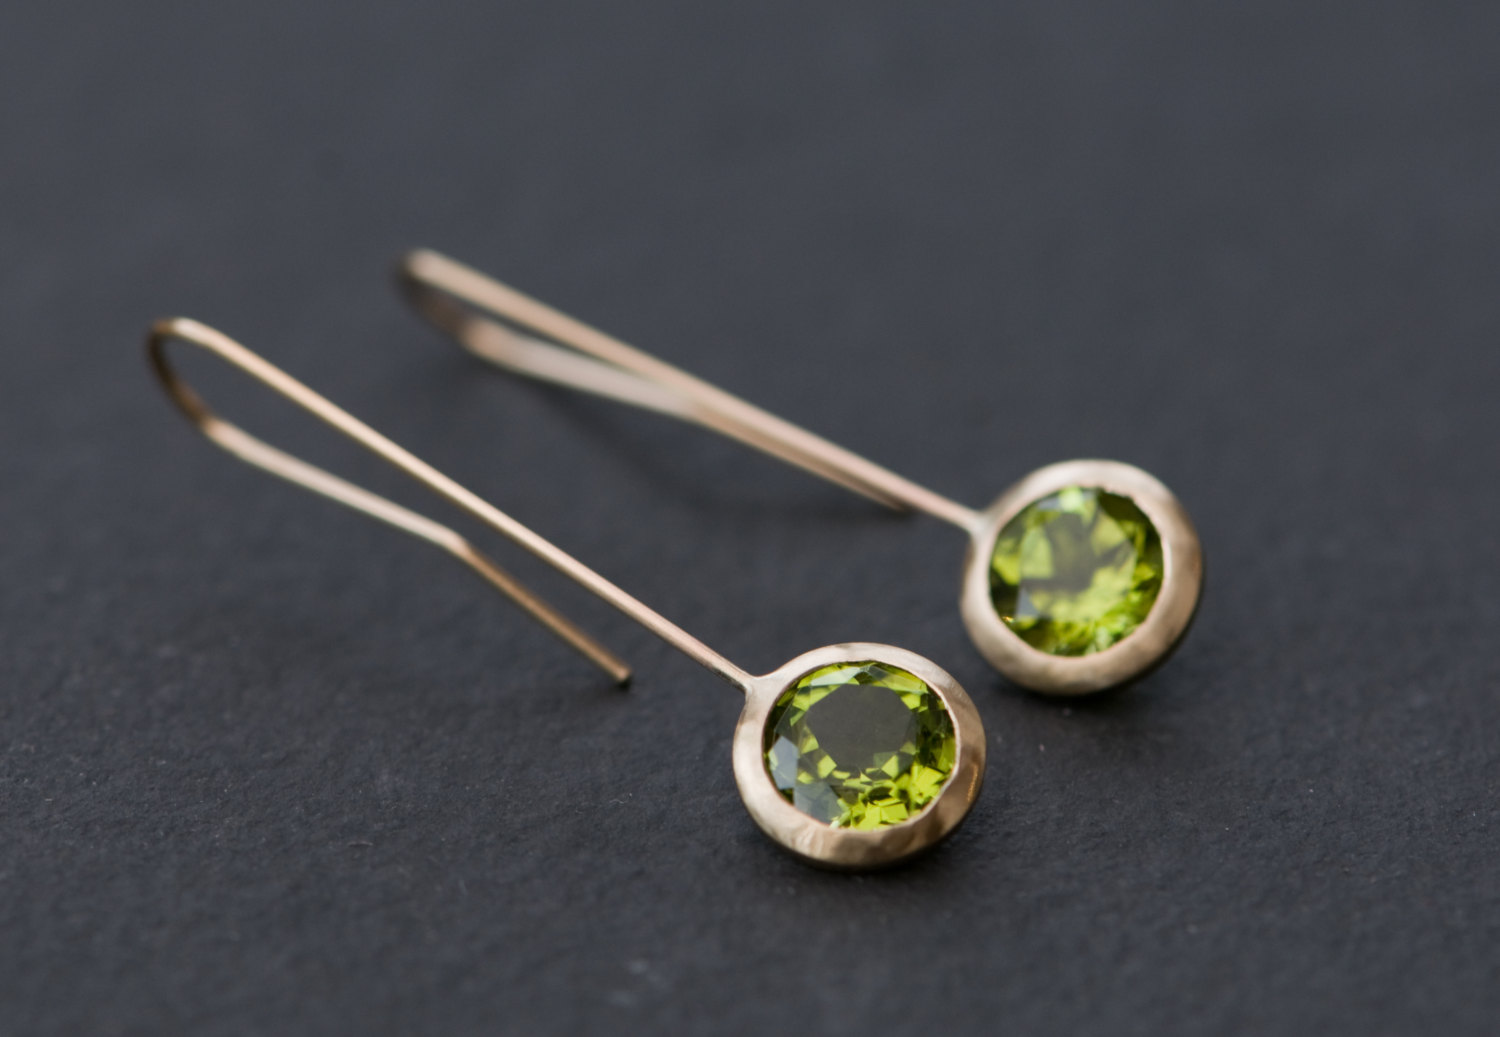 Beautiful green peridot and gold 'Lollipop' earrings. Apple green peridot set in 18k yellow gold. Designed and handmade by William White in Cornwall, UK